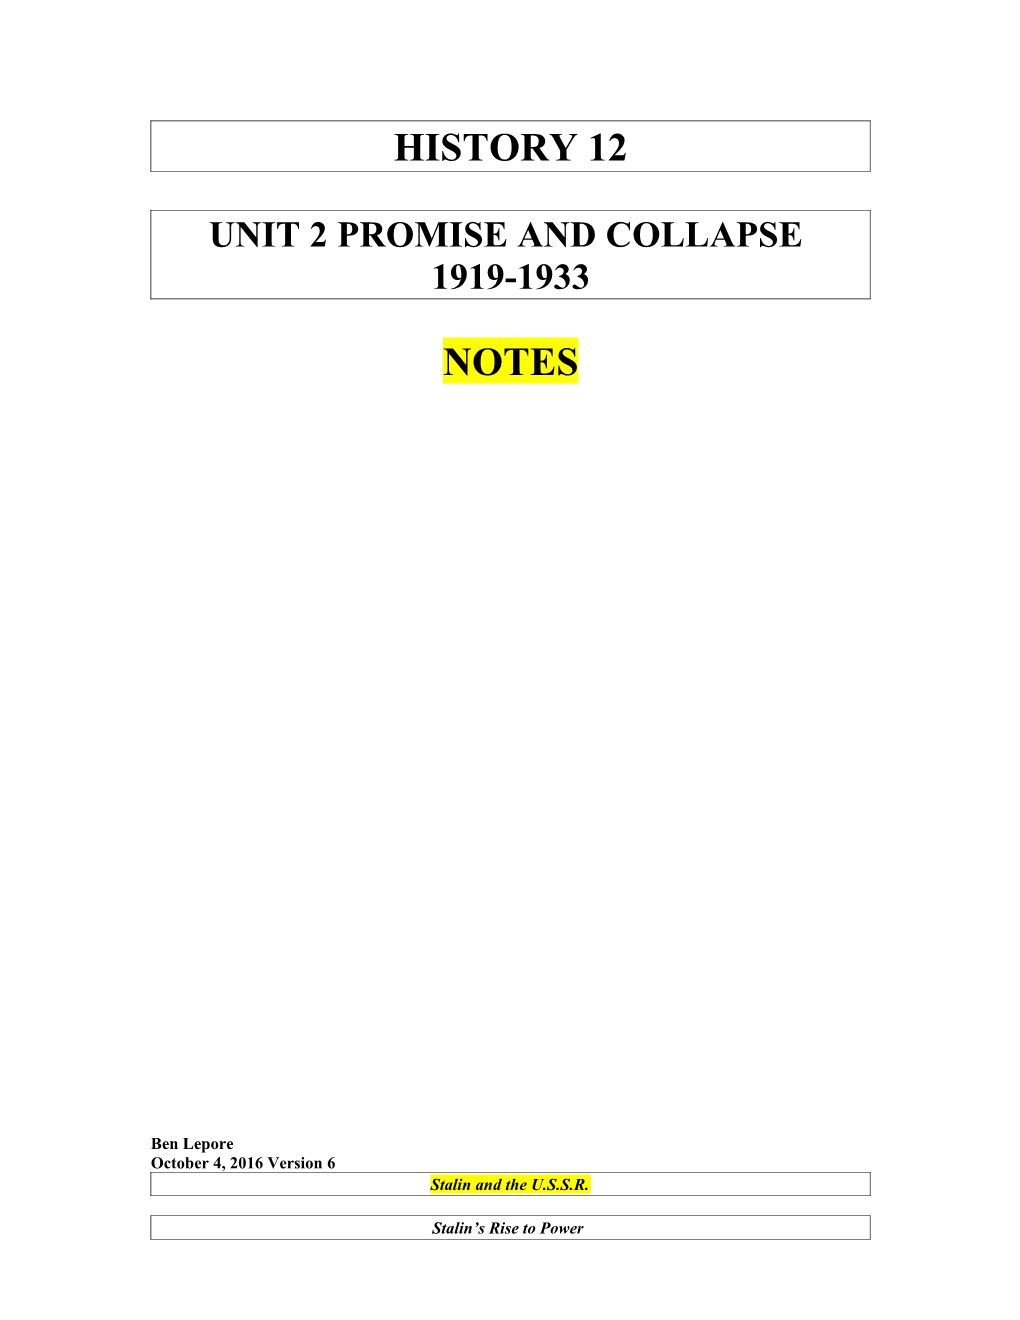 Unit 2 Promise and Collapse